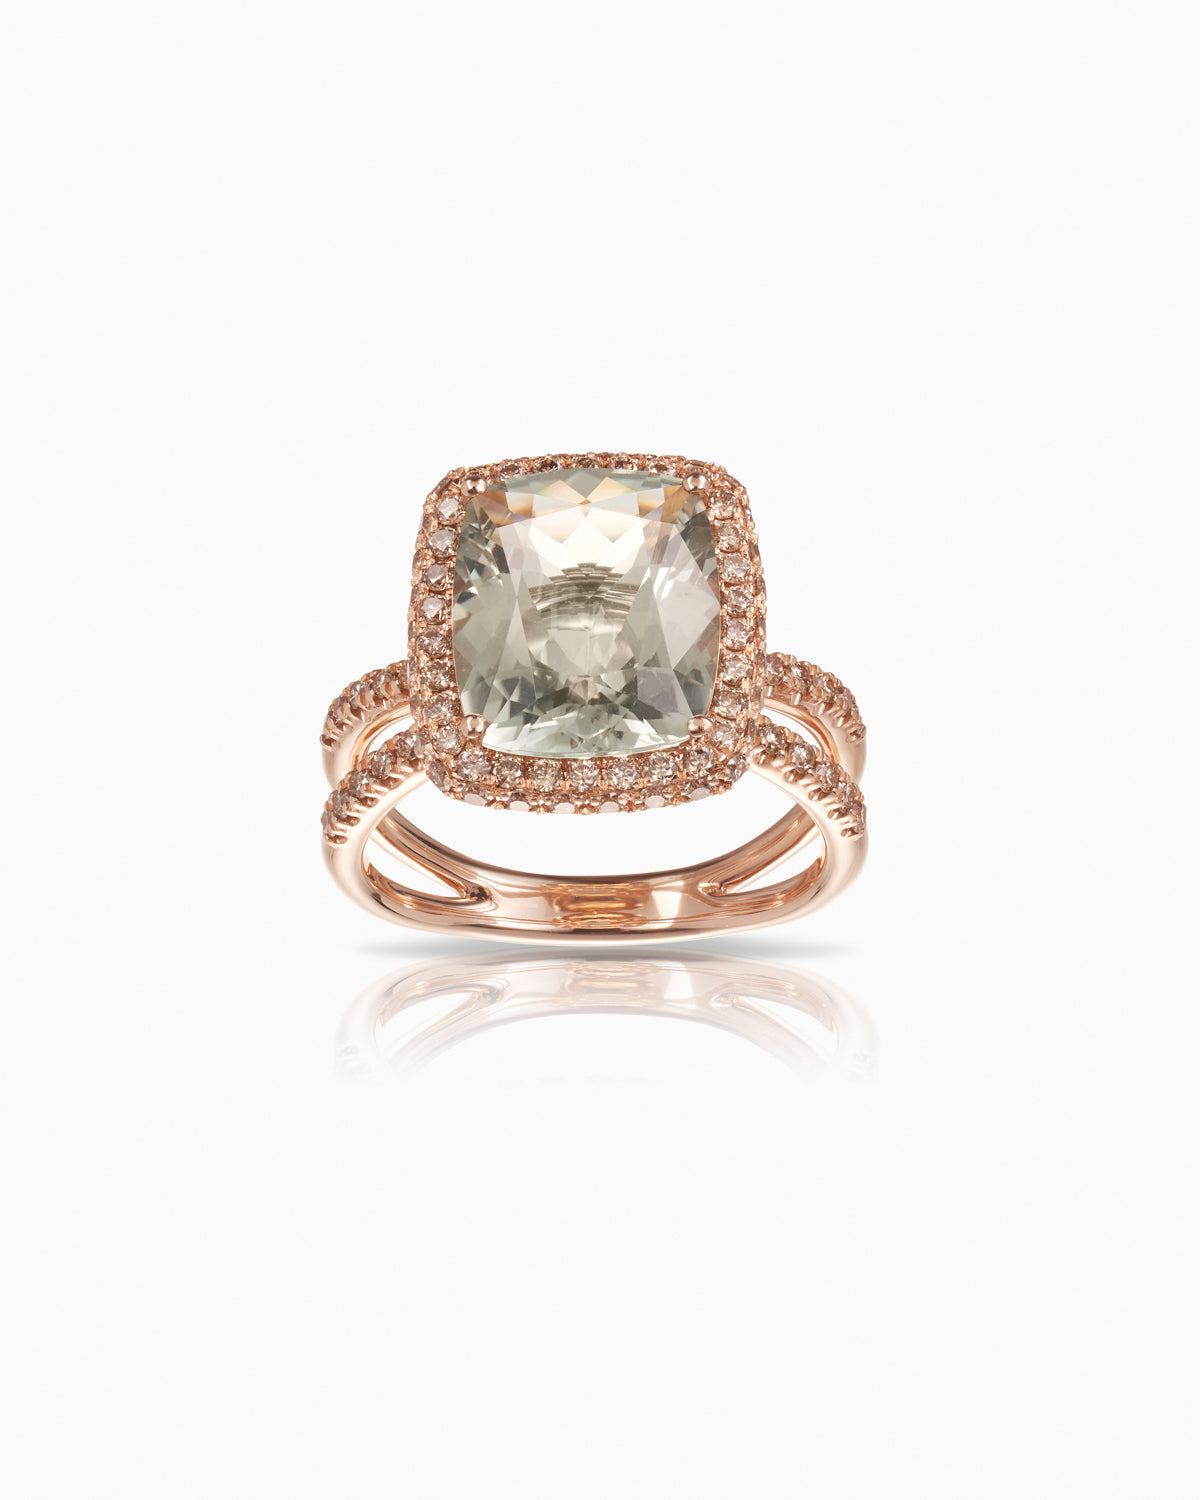 18 karat rose gold 4.26ct green quartz ring featuring 0.81ct champagne diamonds and a split band